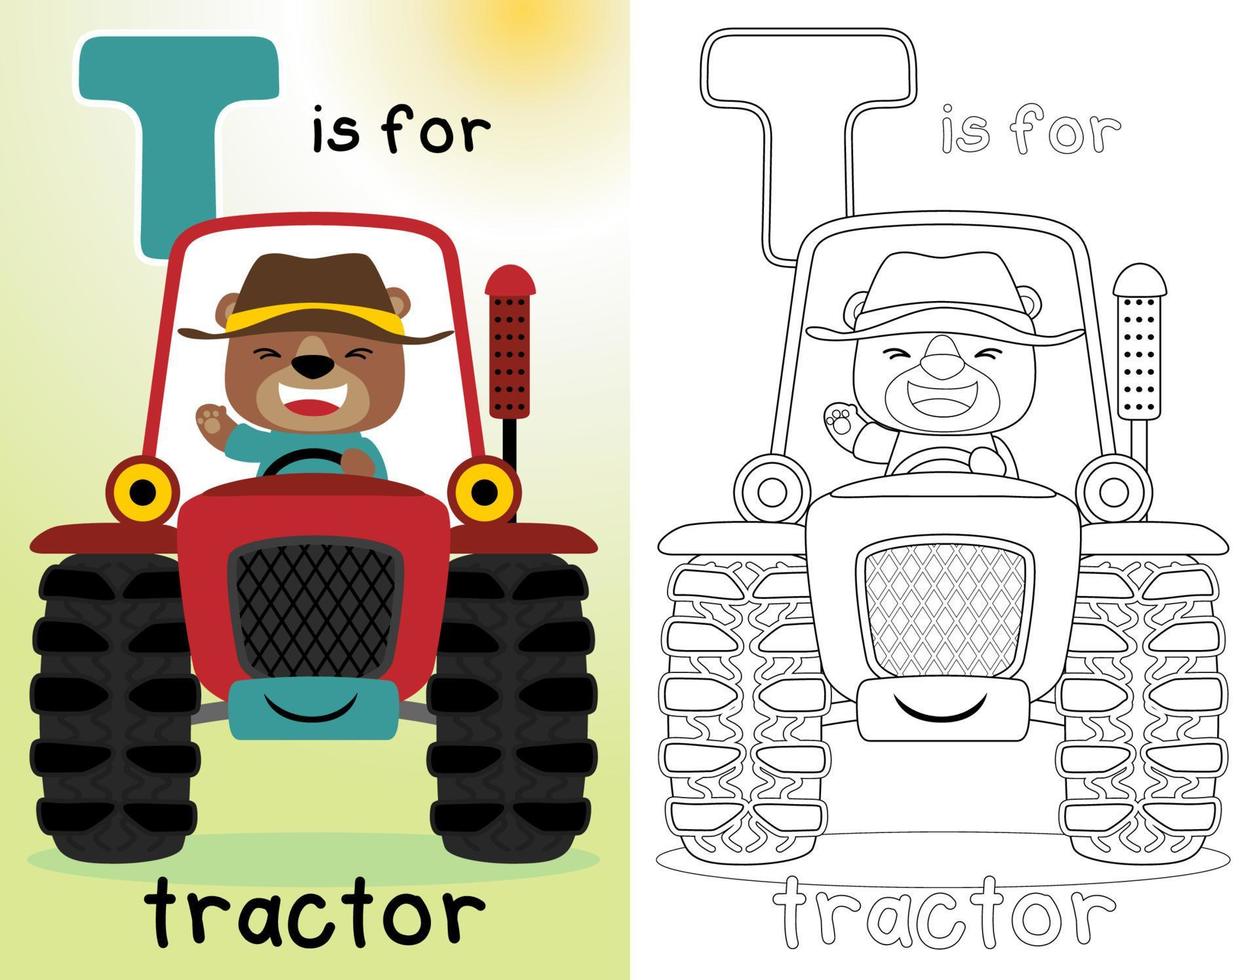 Coloring book or page of cartoon funny  farmer bear on red tractor vector